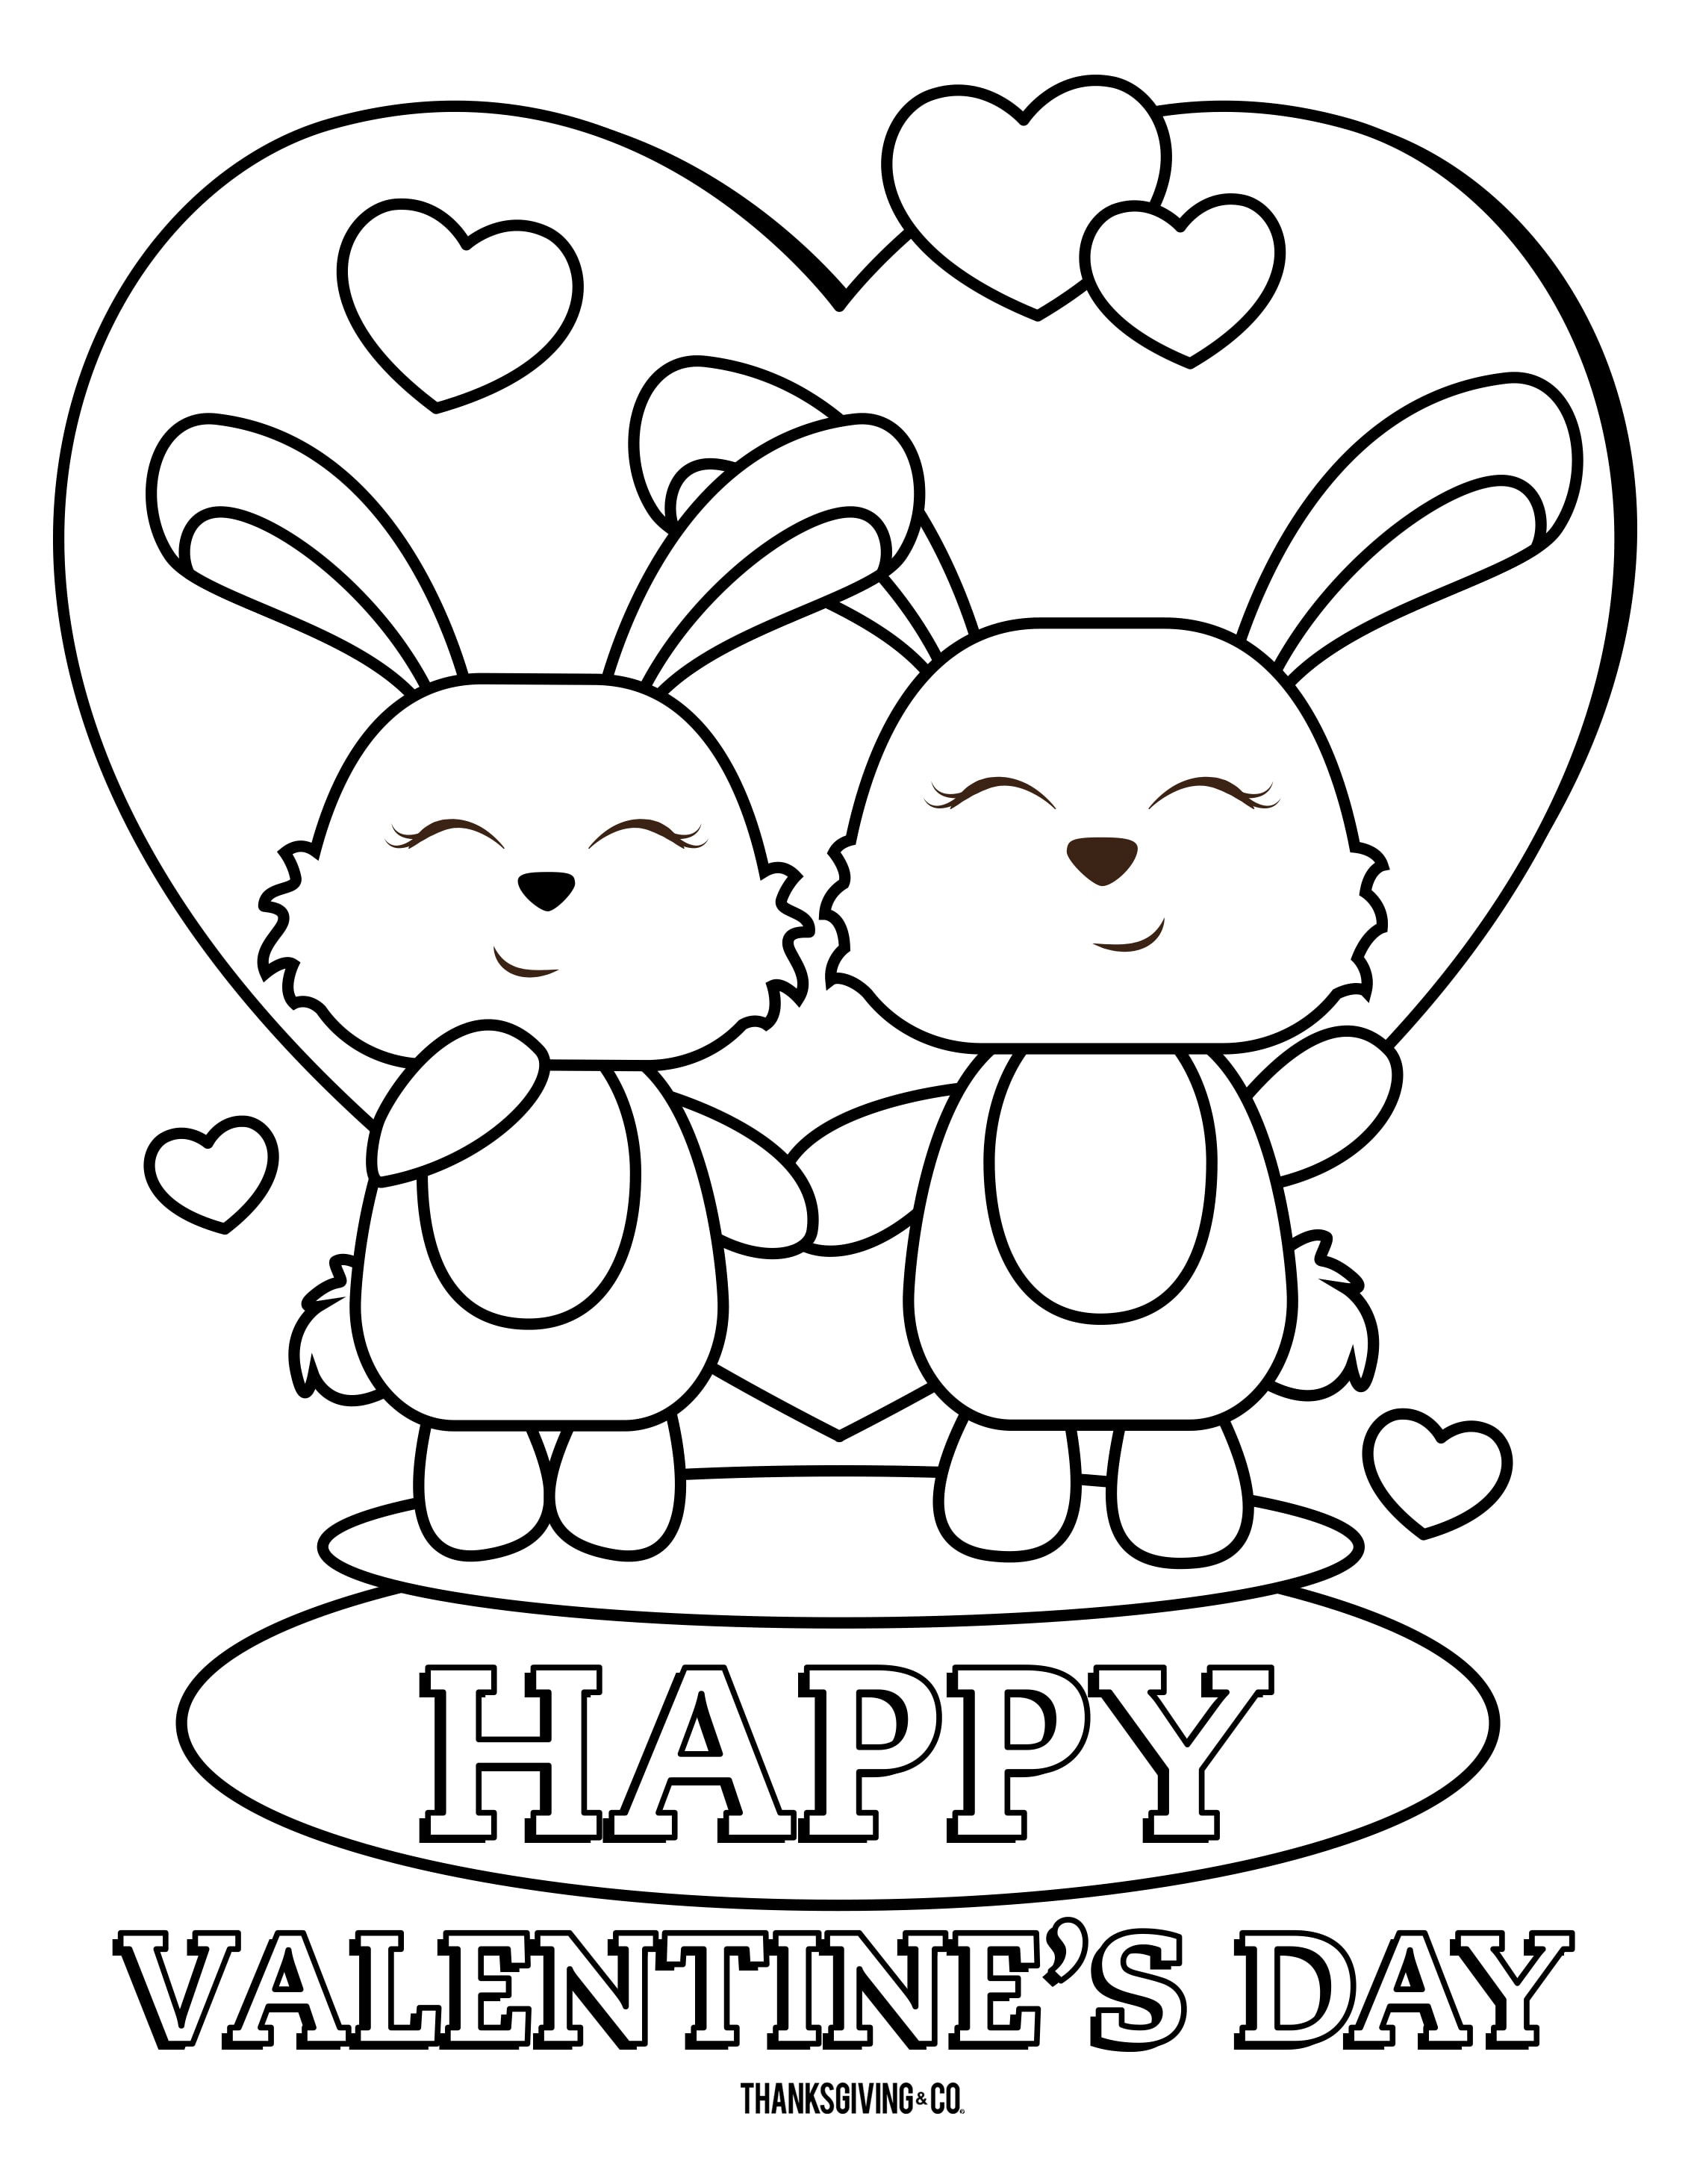 Happy Valentines Day Bunnies Coloring Pages   Coloring Cool